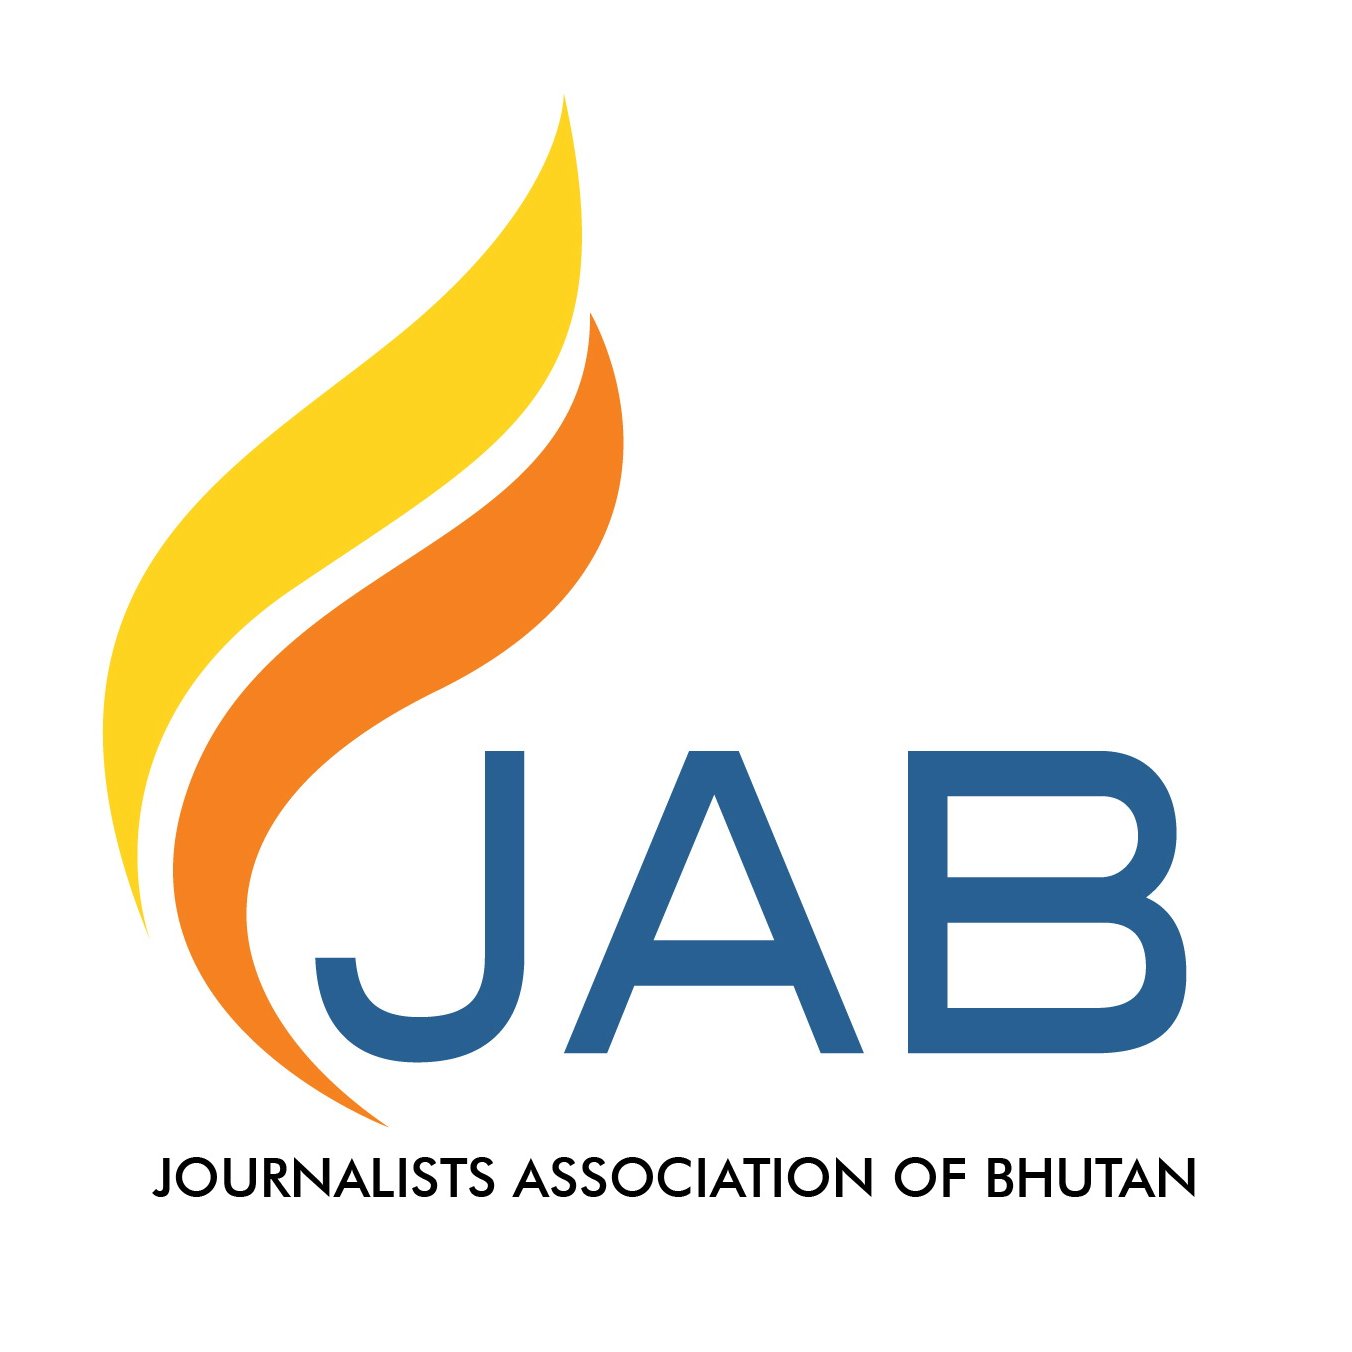 Journalists' Association of Bhutan is a civil society organisation working for the journalism fraternity in Bhutan.